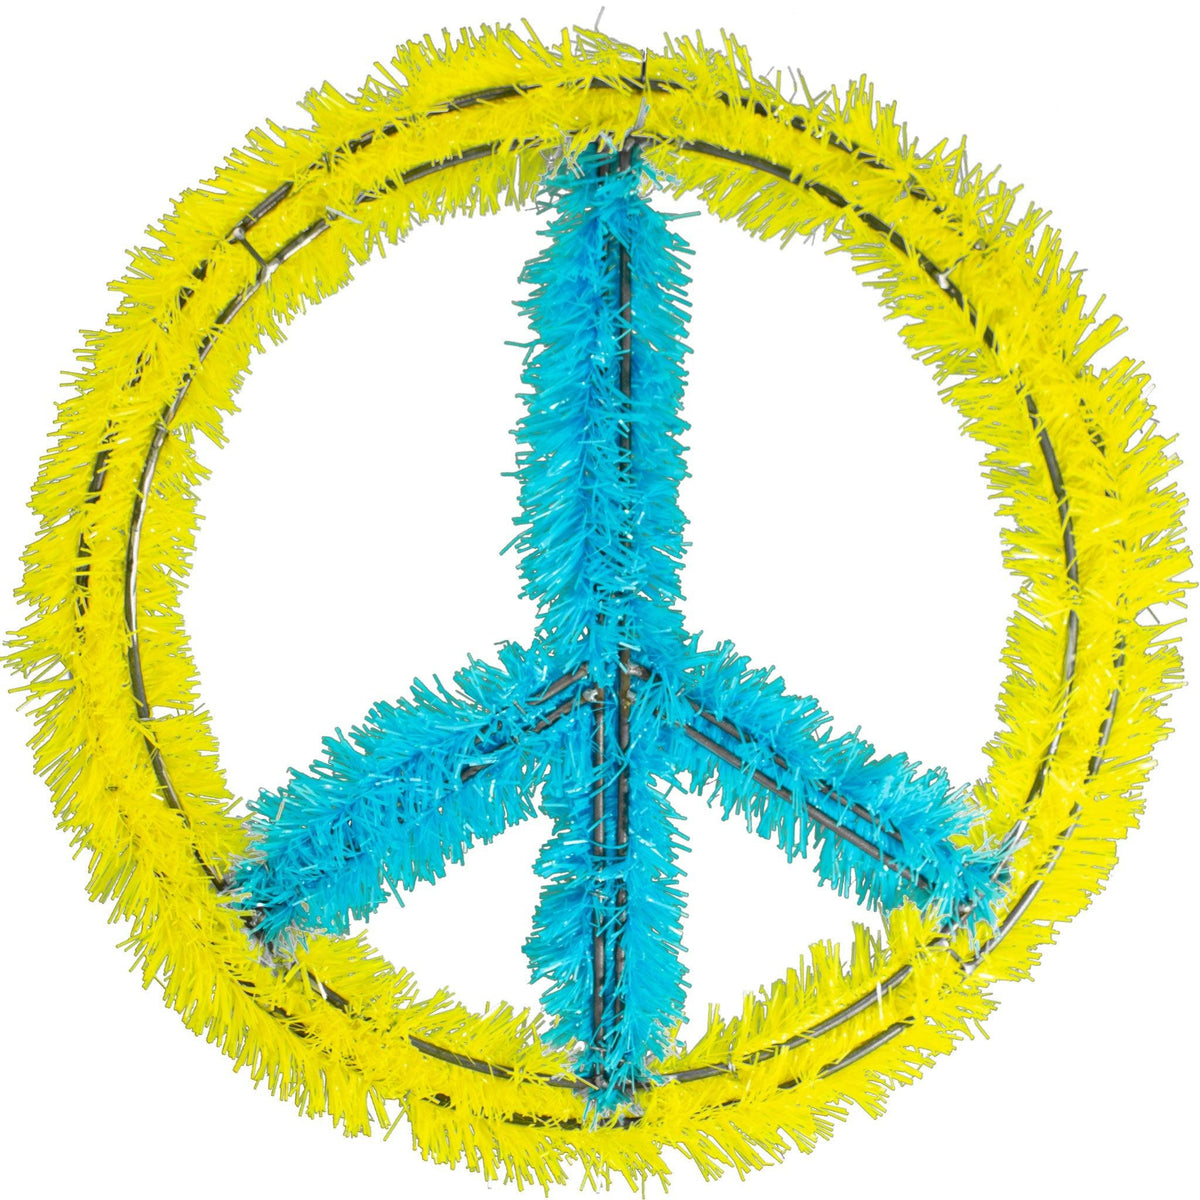 Lee Display stands with the people of Ukraine. Support Ukraine with a Blue and Gold Peace Sign. Protest the invasion of Ukraine. Show your support with us and we'll donate the proceeds to Ukraine and the Nova Ukraine association. Shop now at leedisplay.com